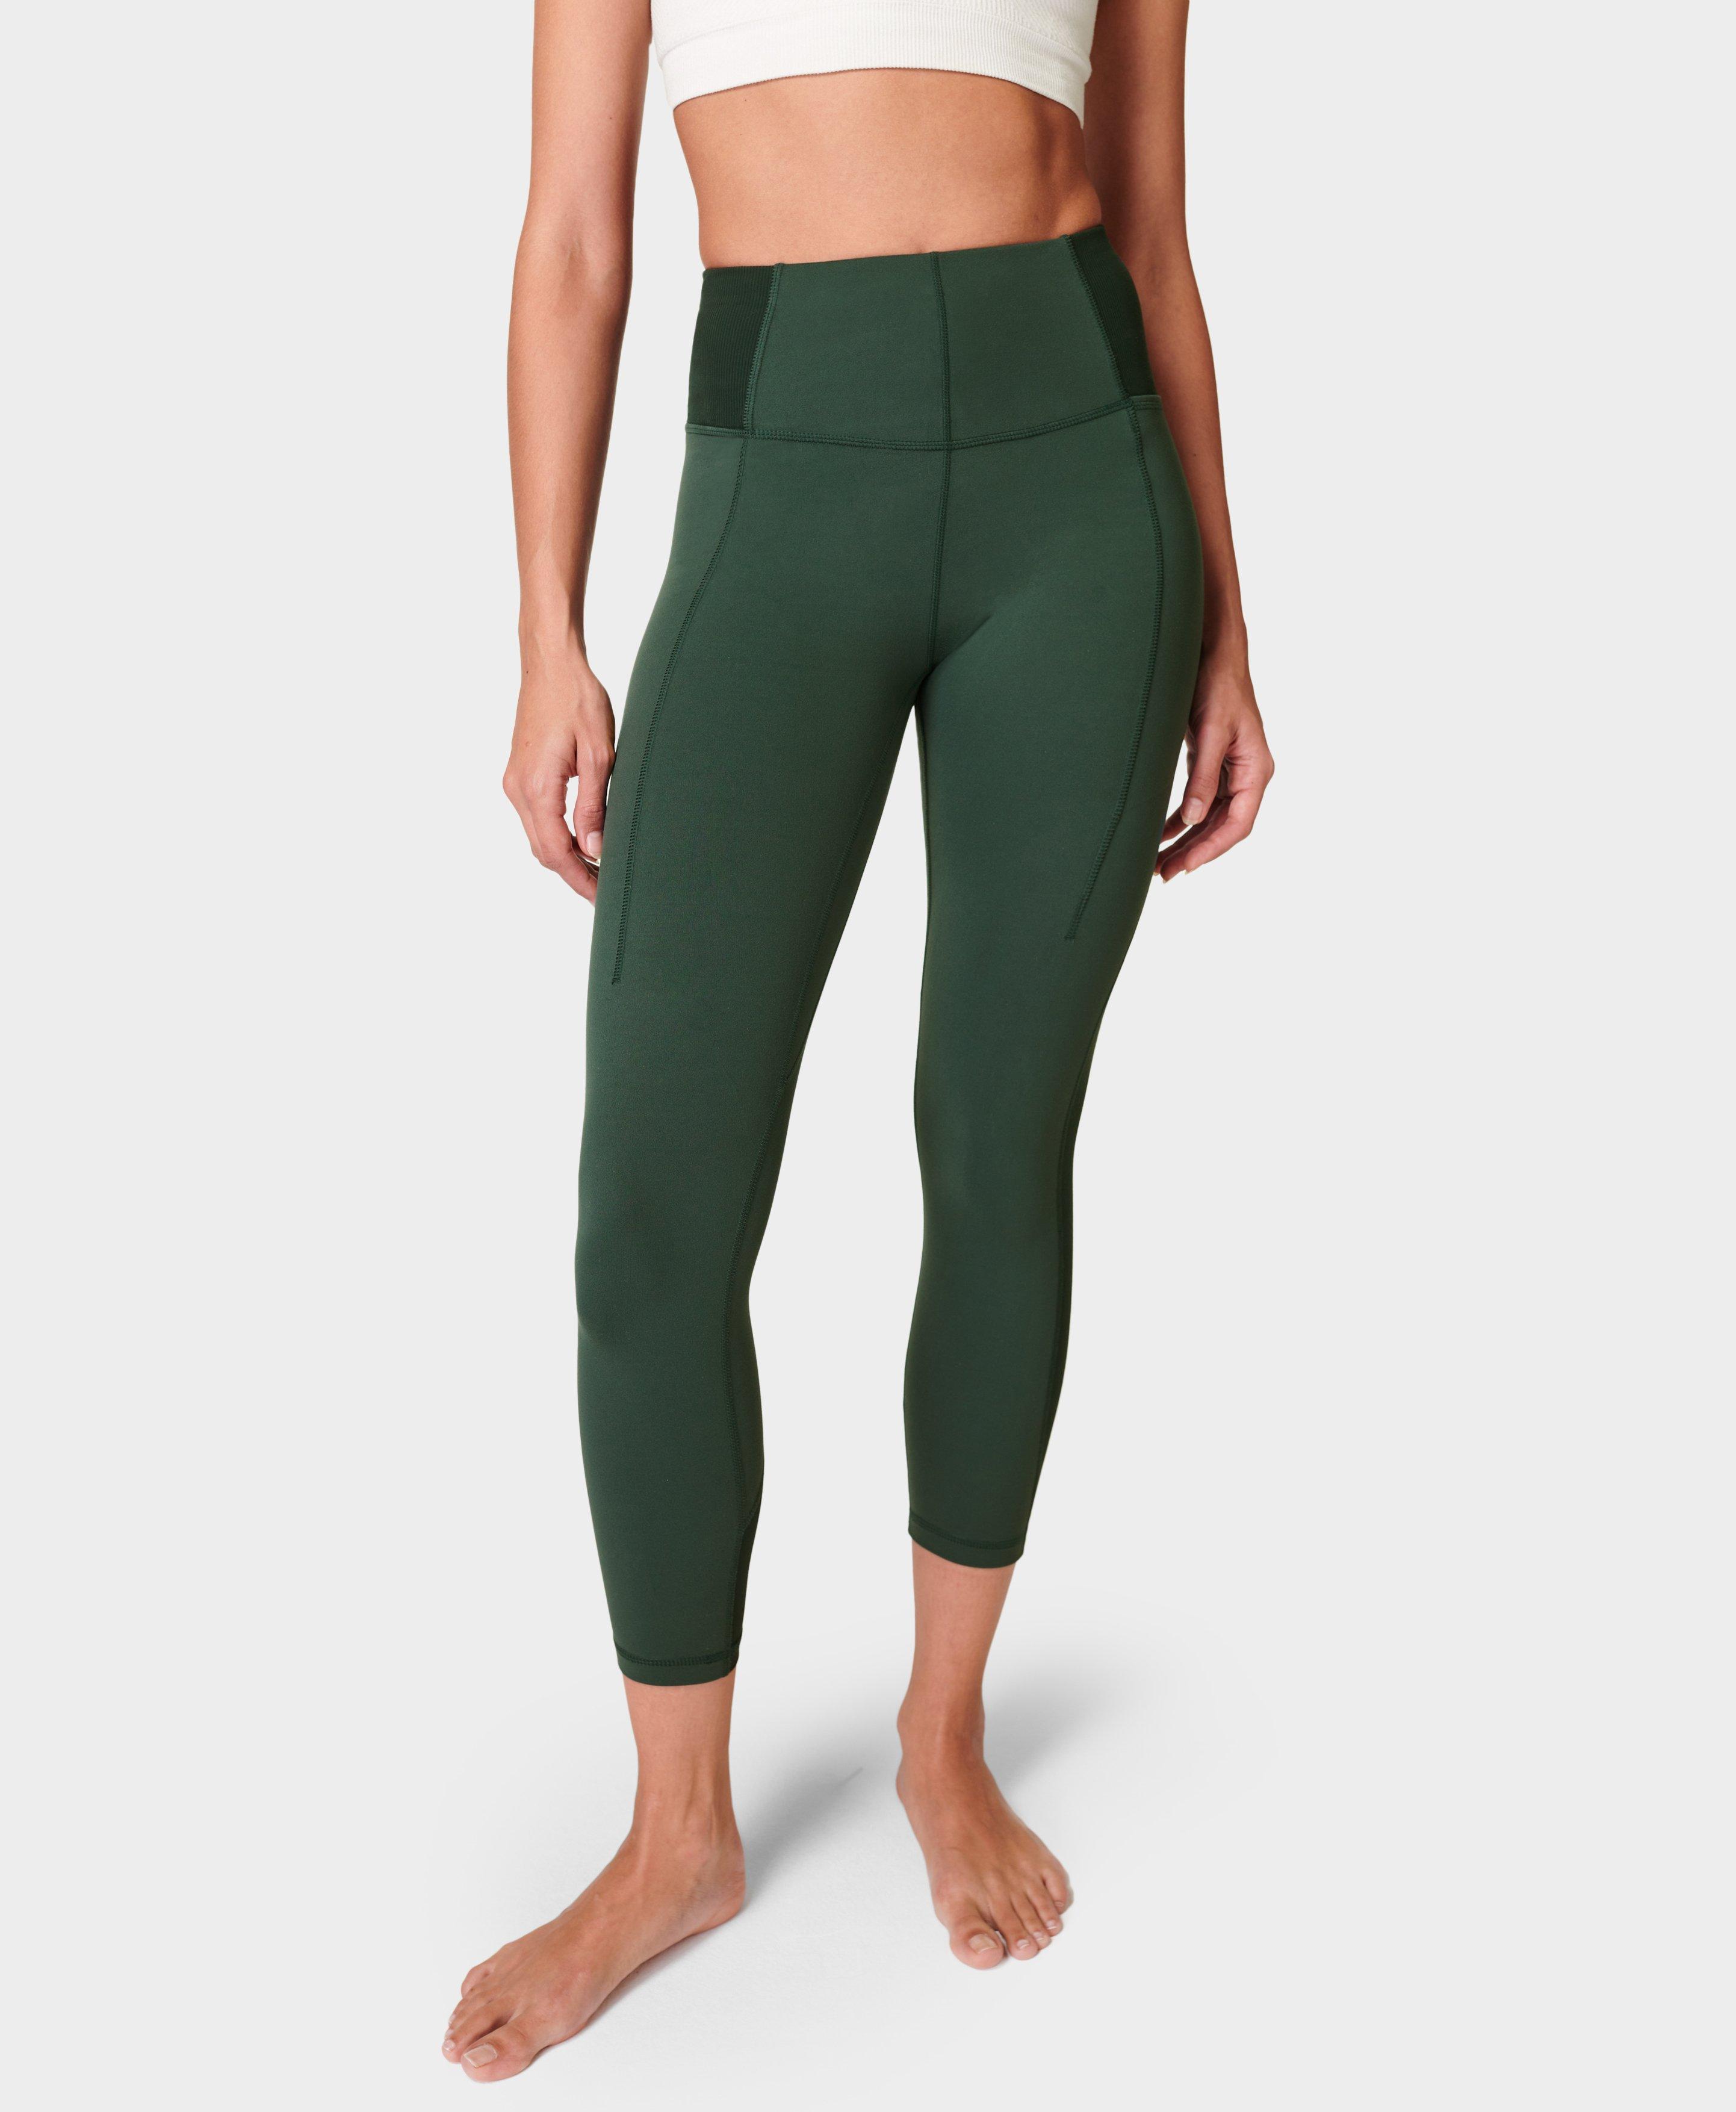 Sage Collective 7/8 ribbed leggings.